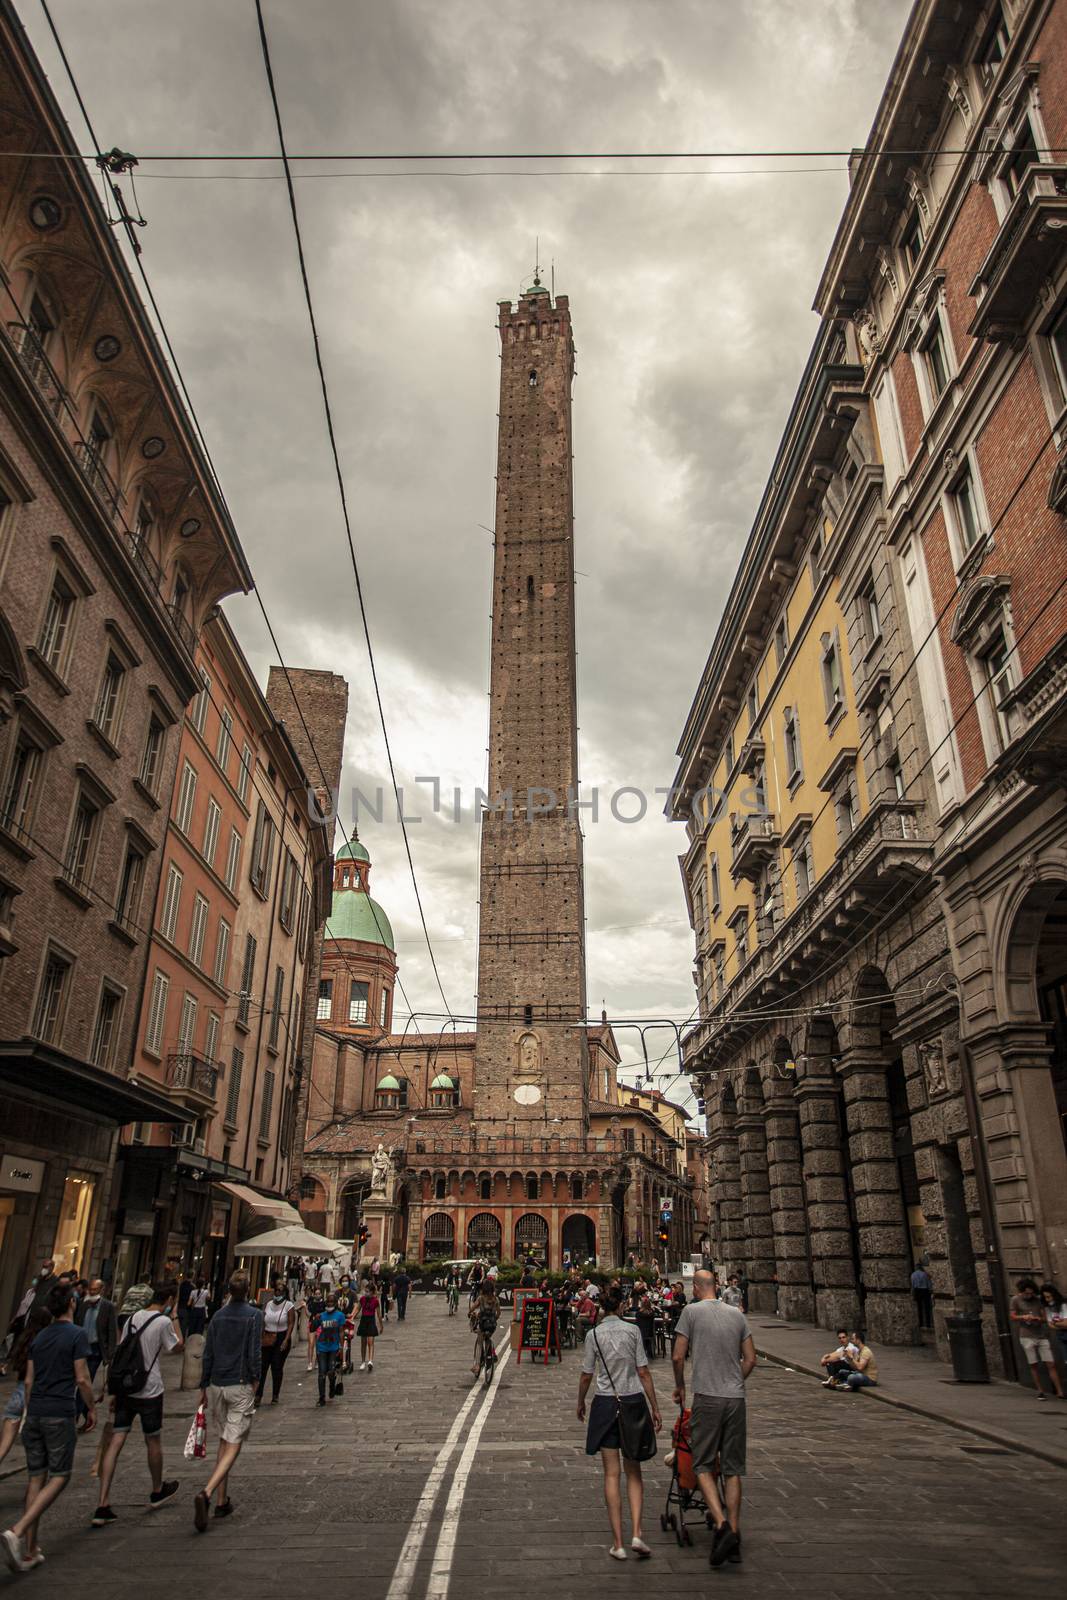 Via Rizzoli in Bologna, Italy with his historical Building and the Asinelli Tower at the end 13 by pippocarlot